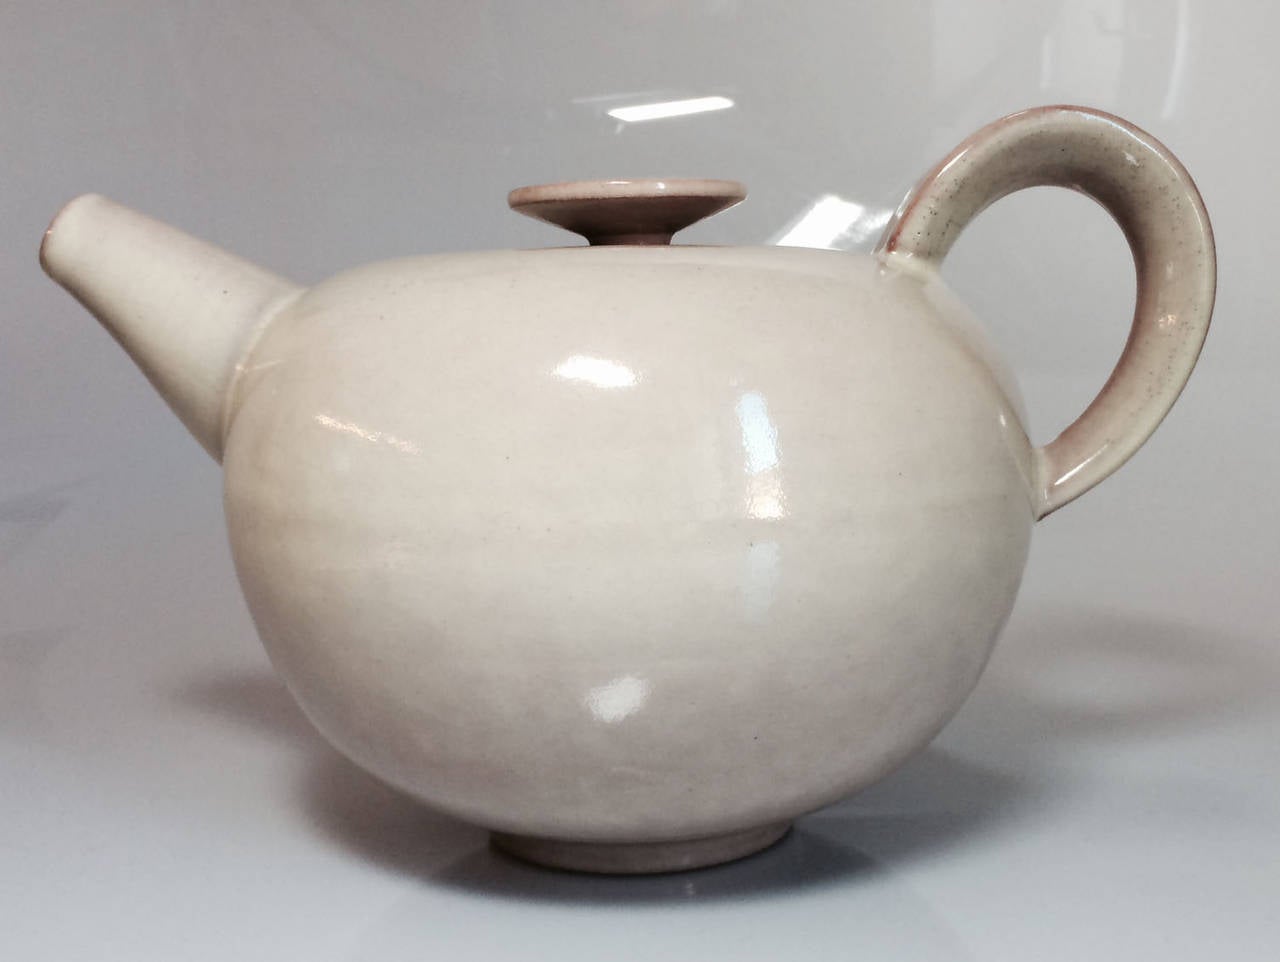 Teapot by Otto Lindig, designed in the 1930s for the Karlsruhe Majoika, in perfect condition.